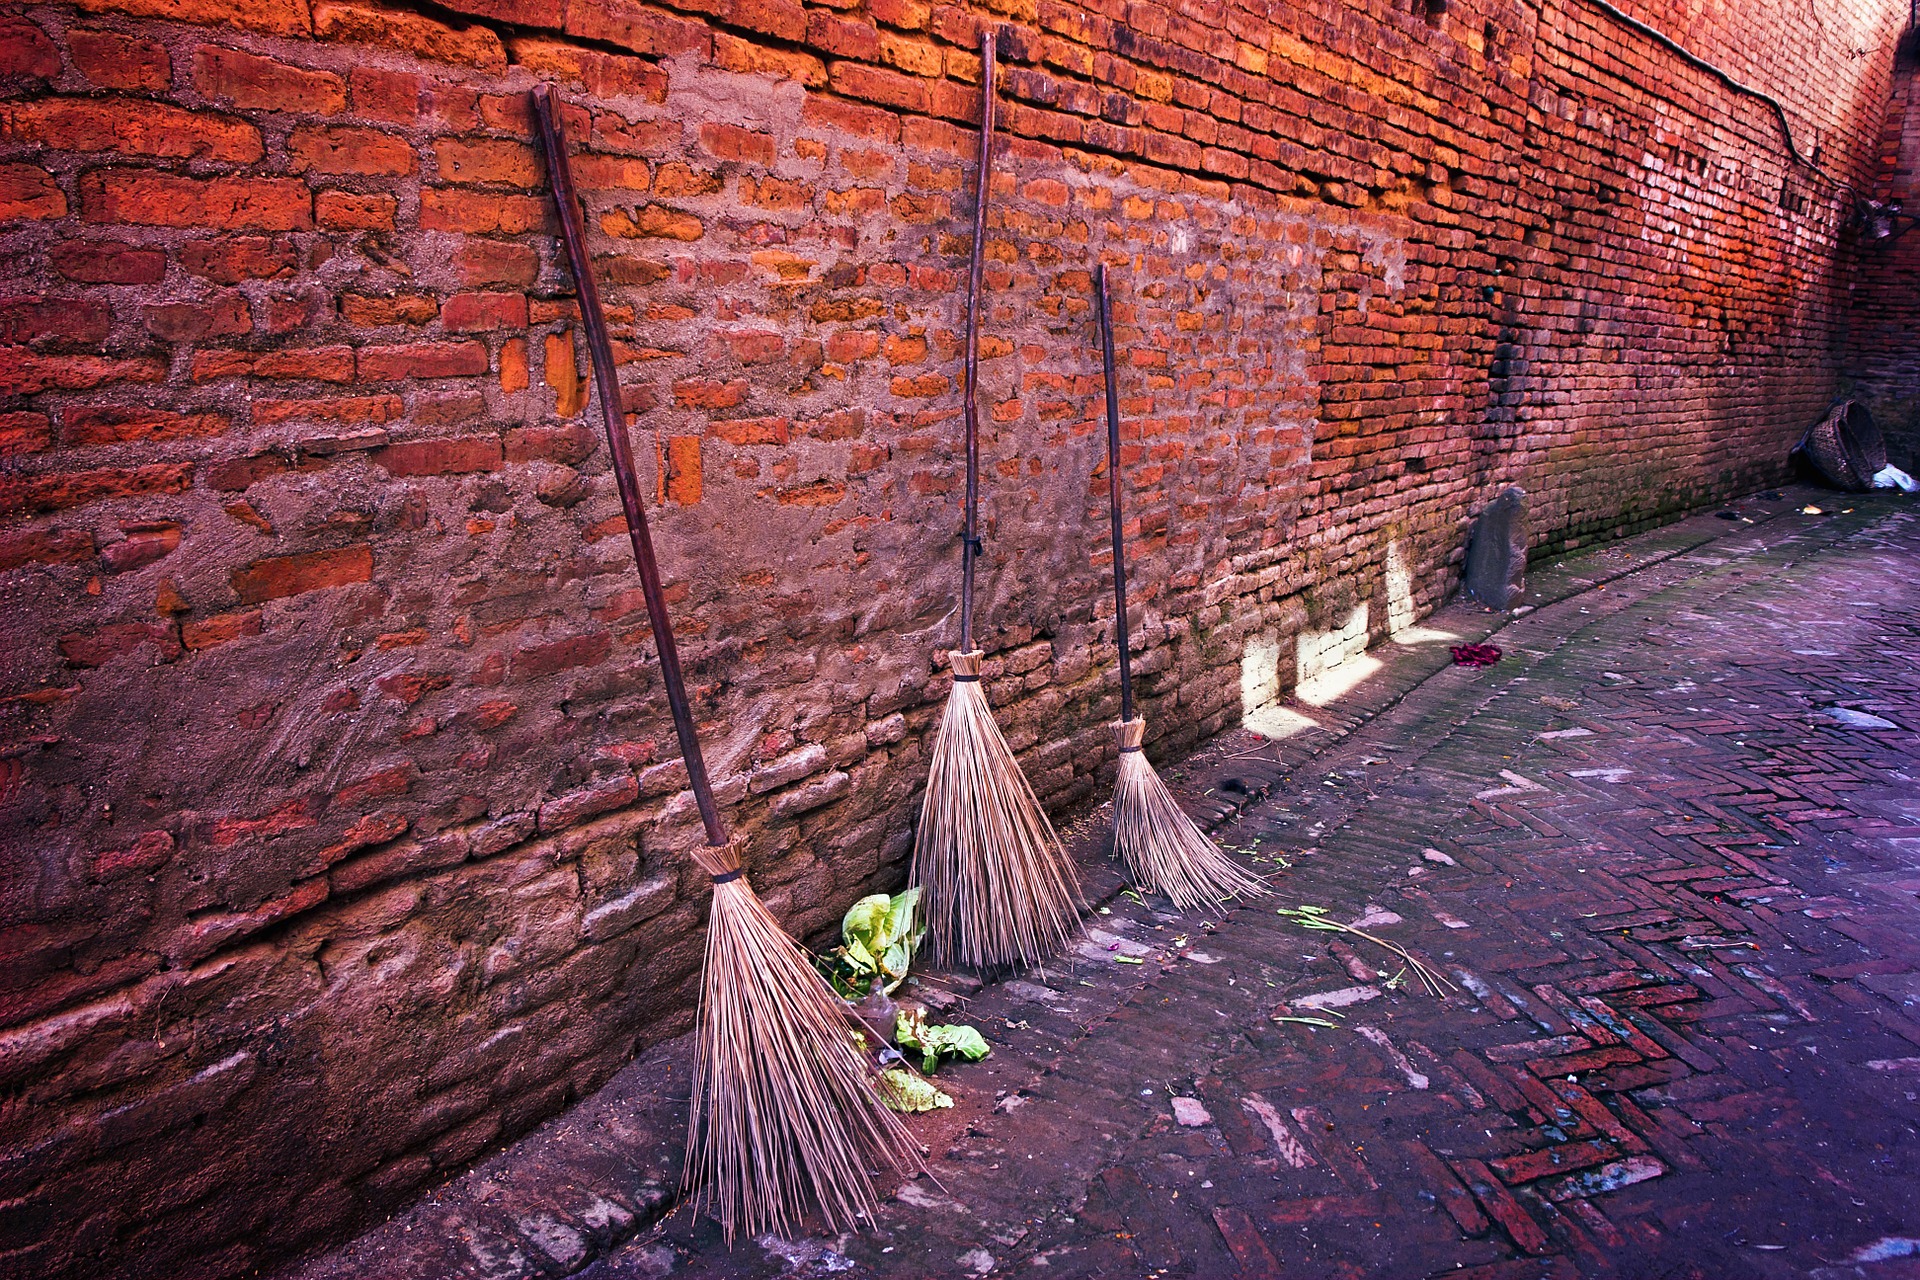 Brooms against a brick wall.